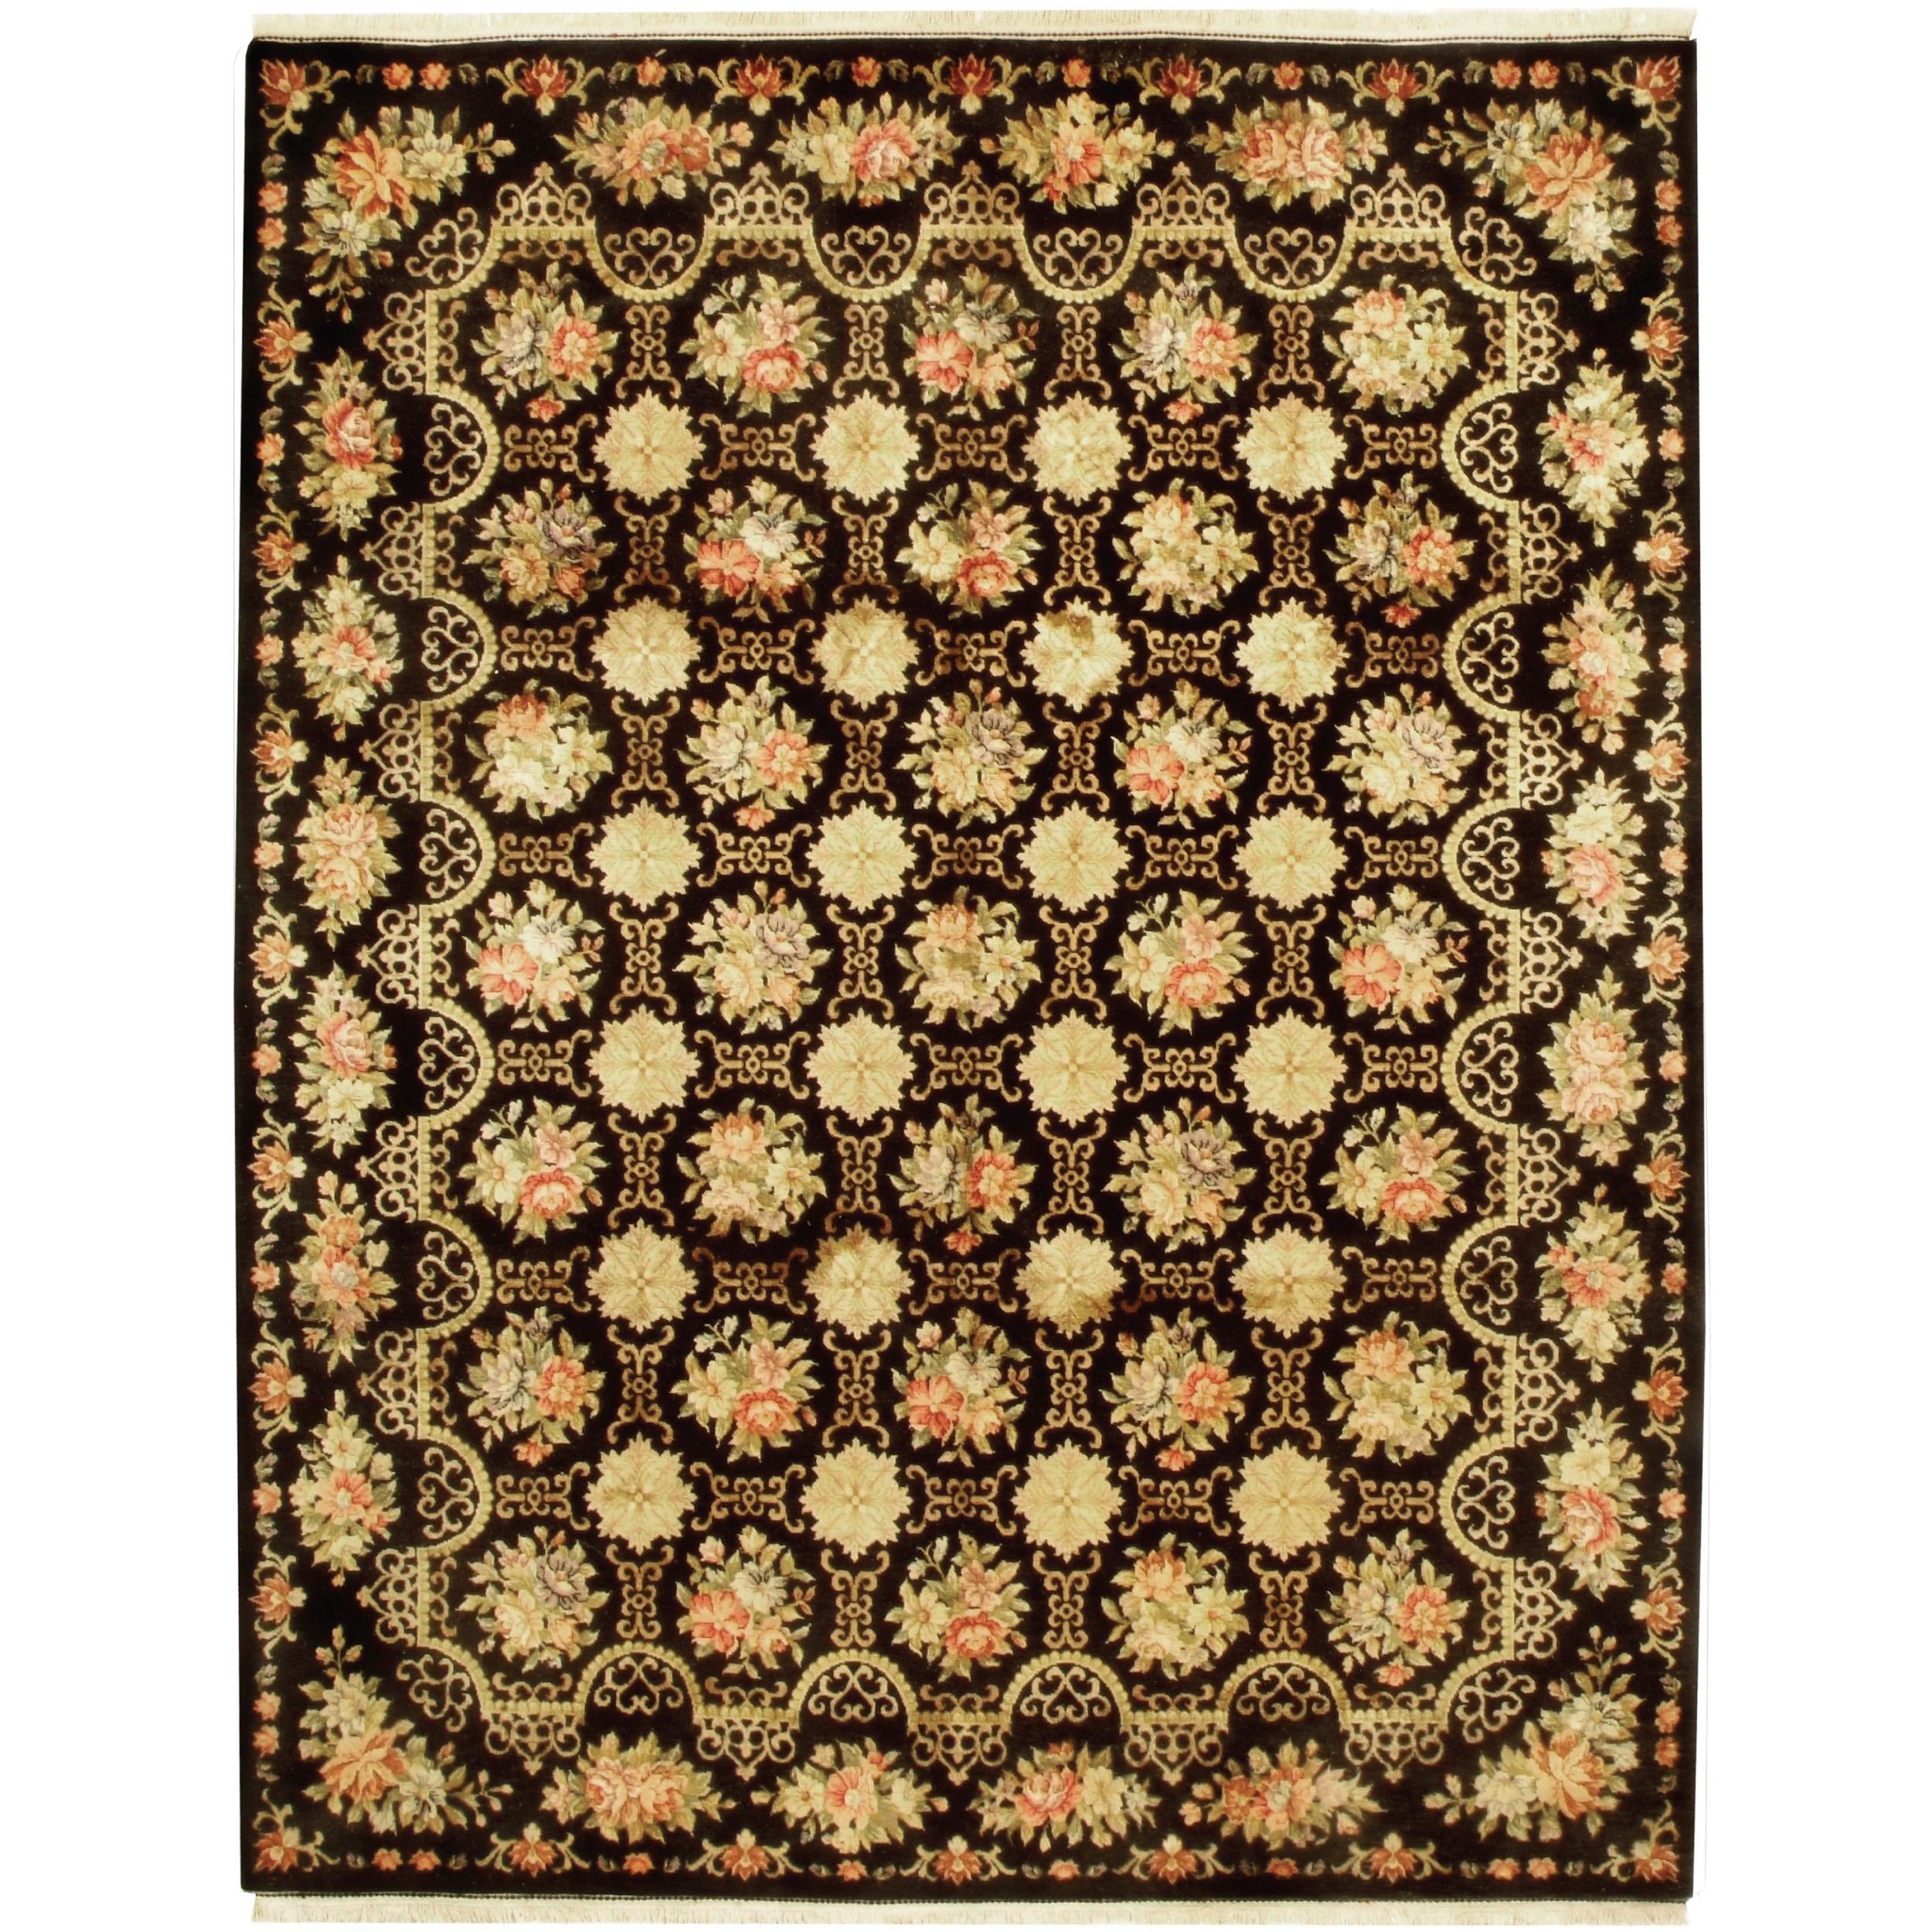 Luxury European Hand-Knotted Cambridge Black 12x15 Rug In New Condition For Sale In Secaucus, NJ